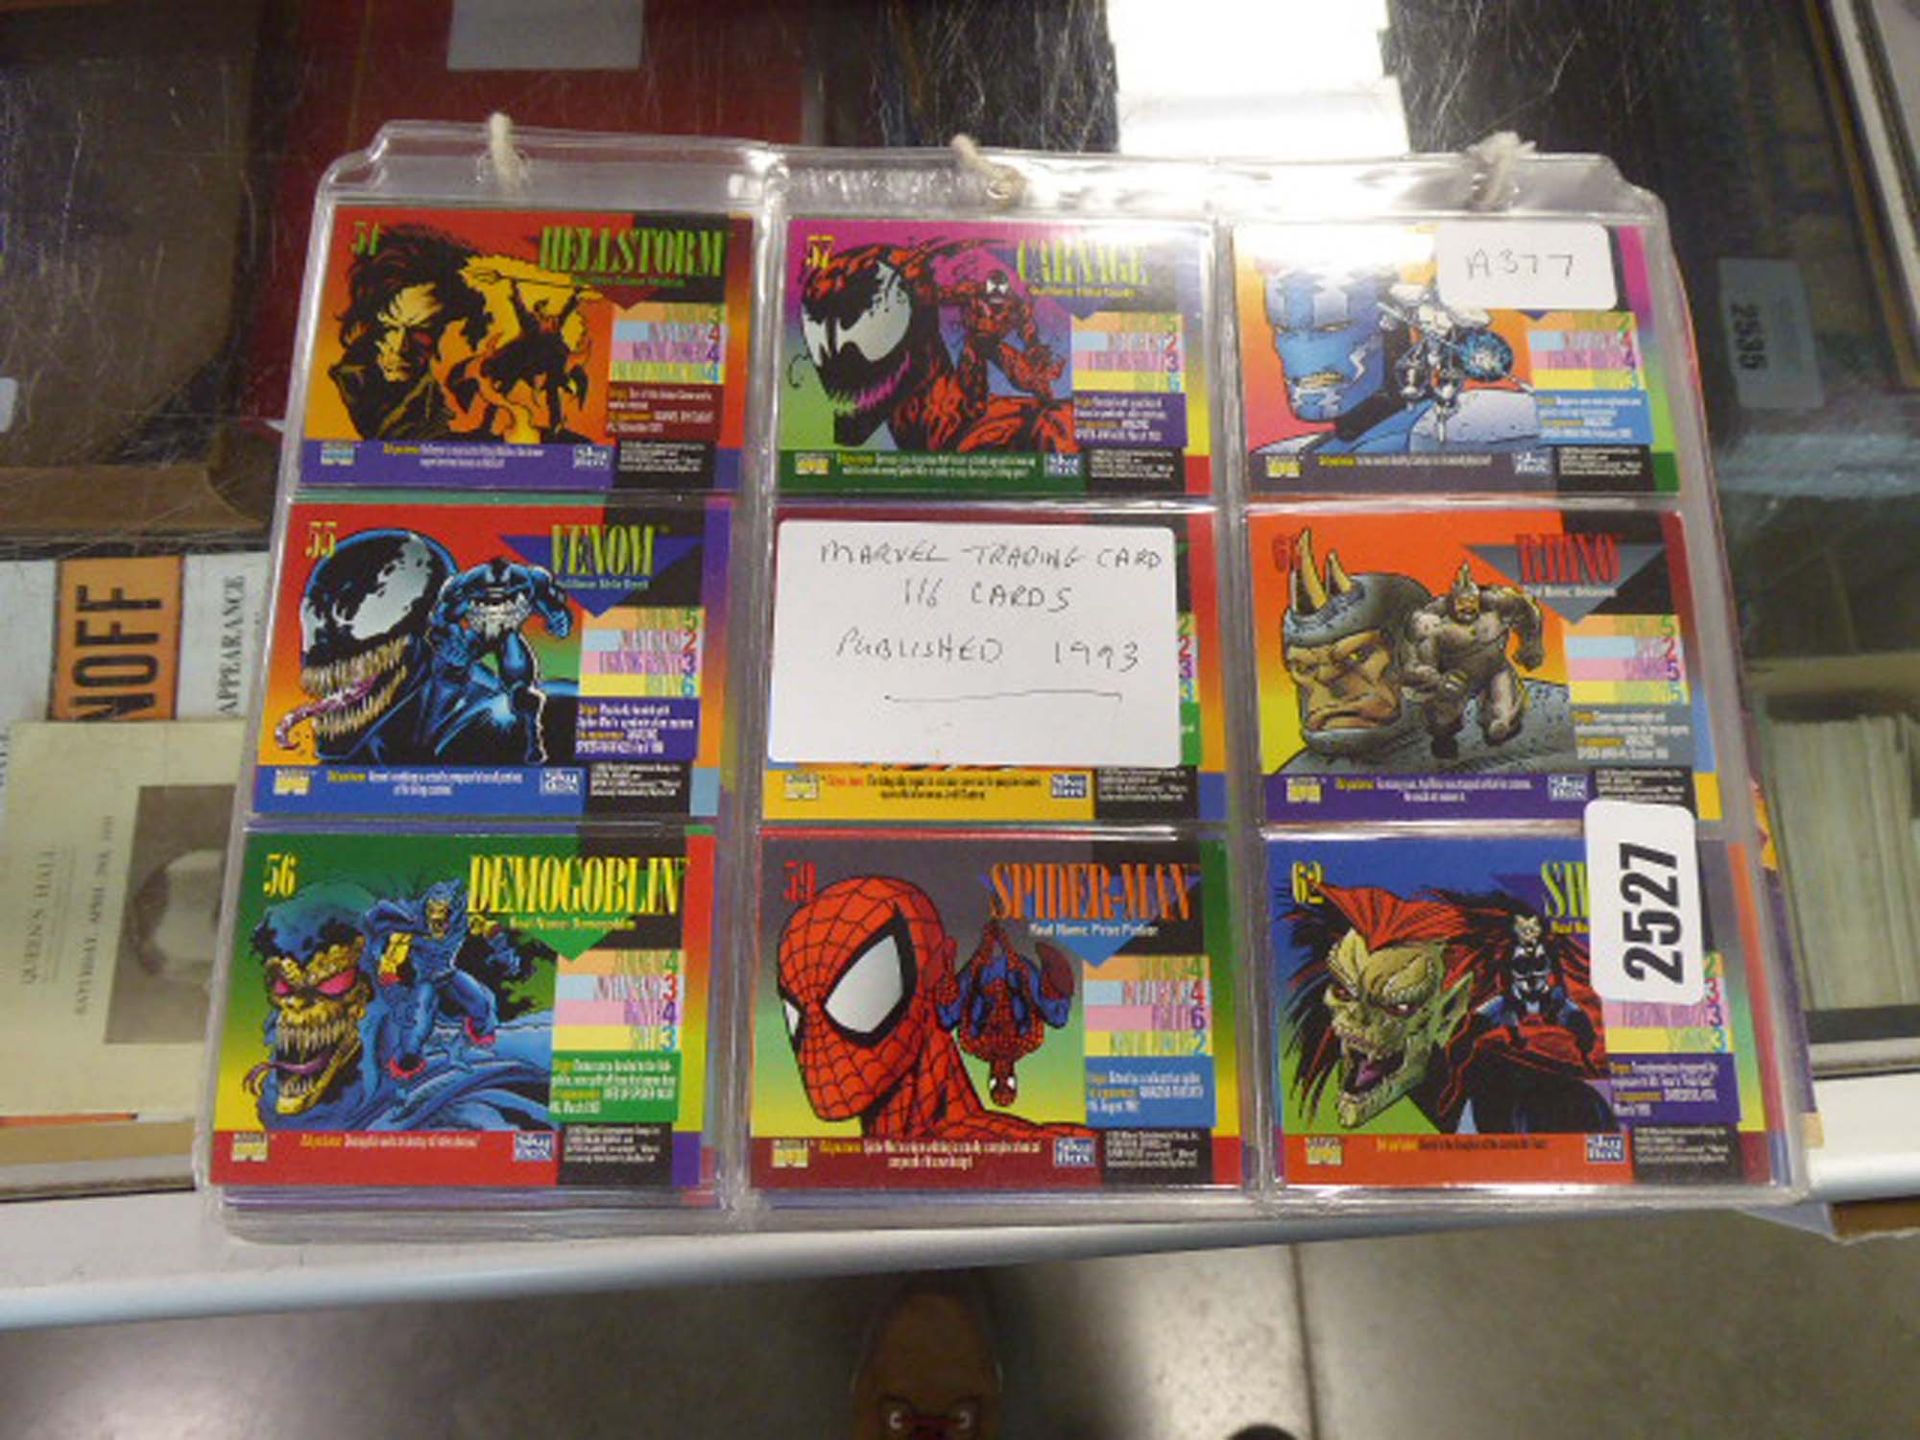 Marvel trading cards published in the early 90's